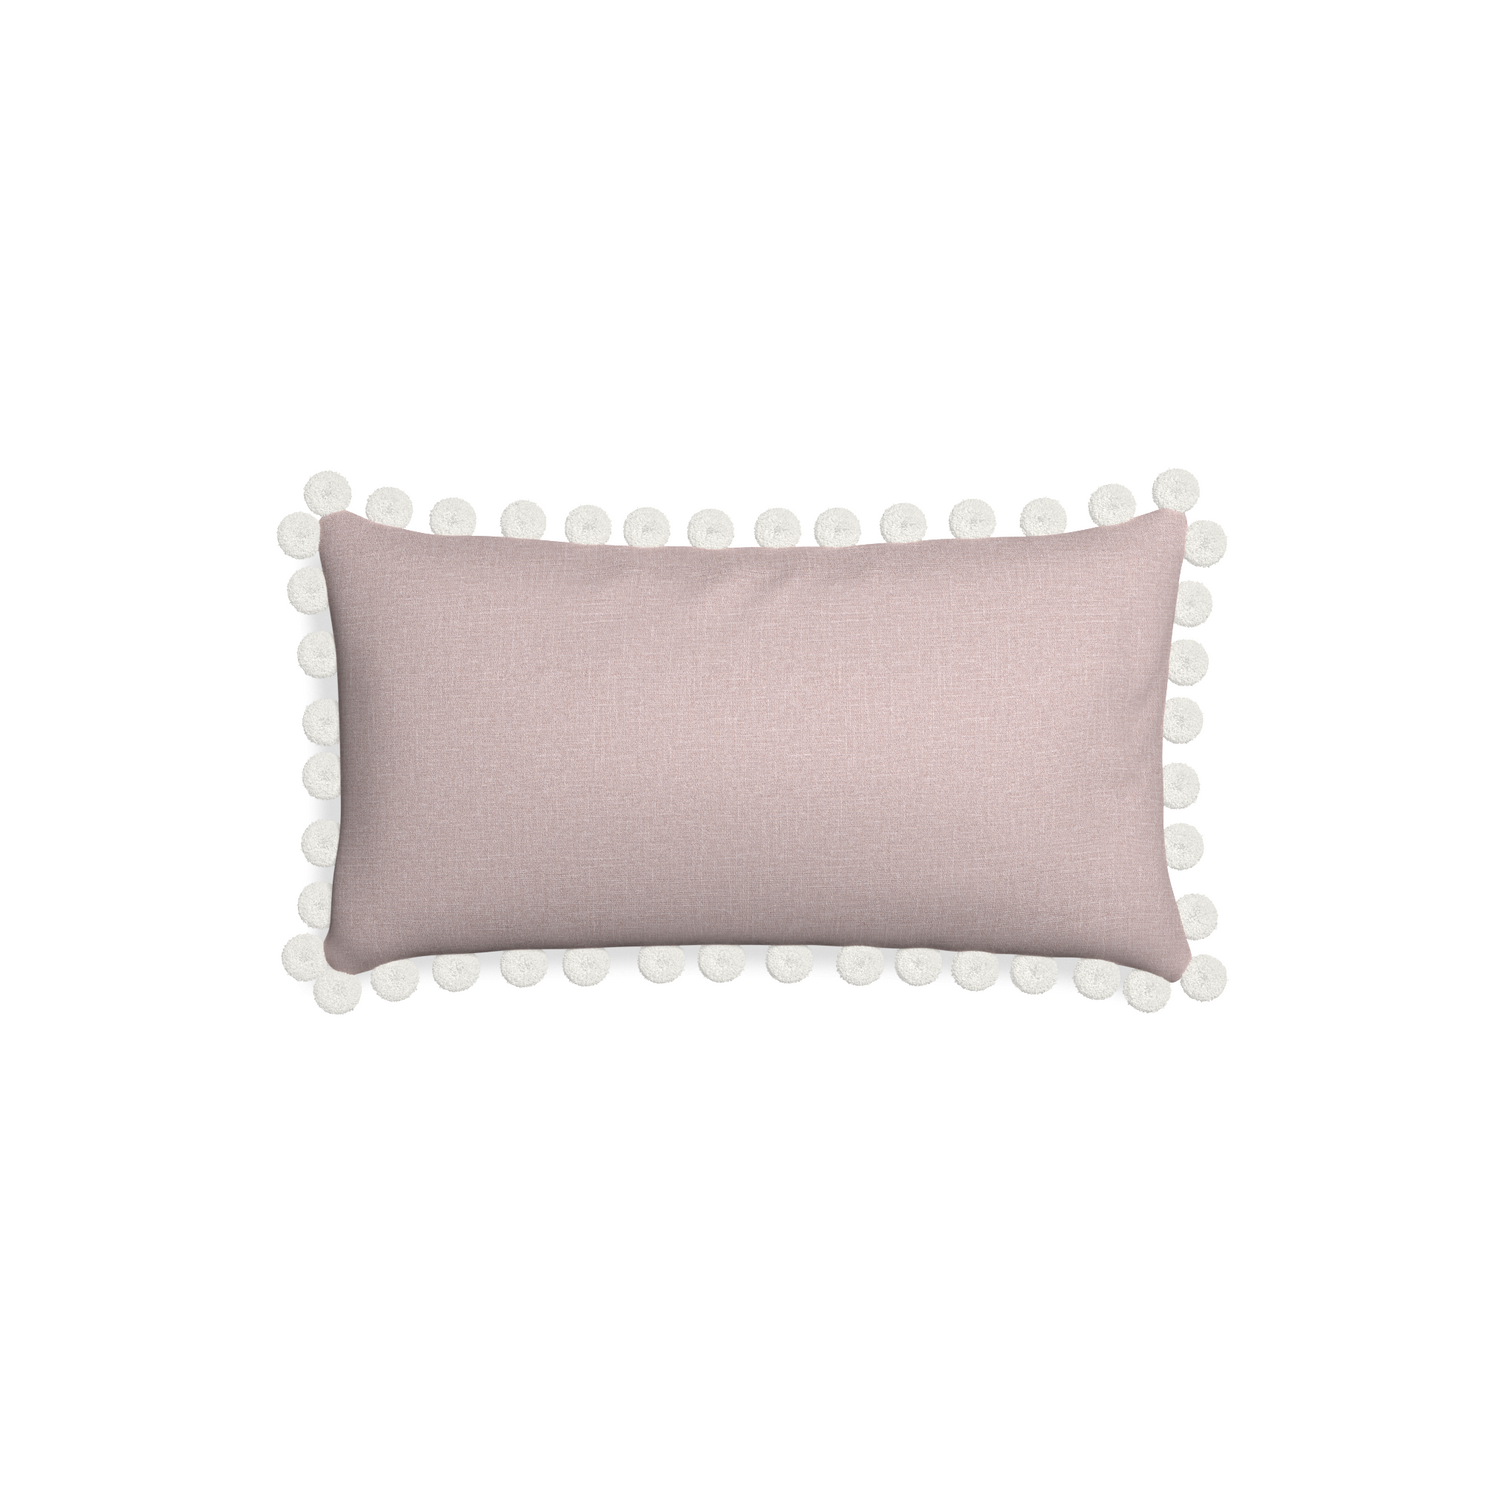 Petite-lumbar orchid custom mauve pinkpillow with snow pom pom on white background